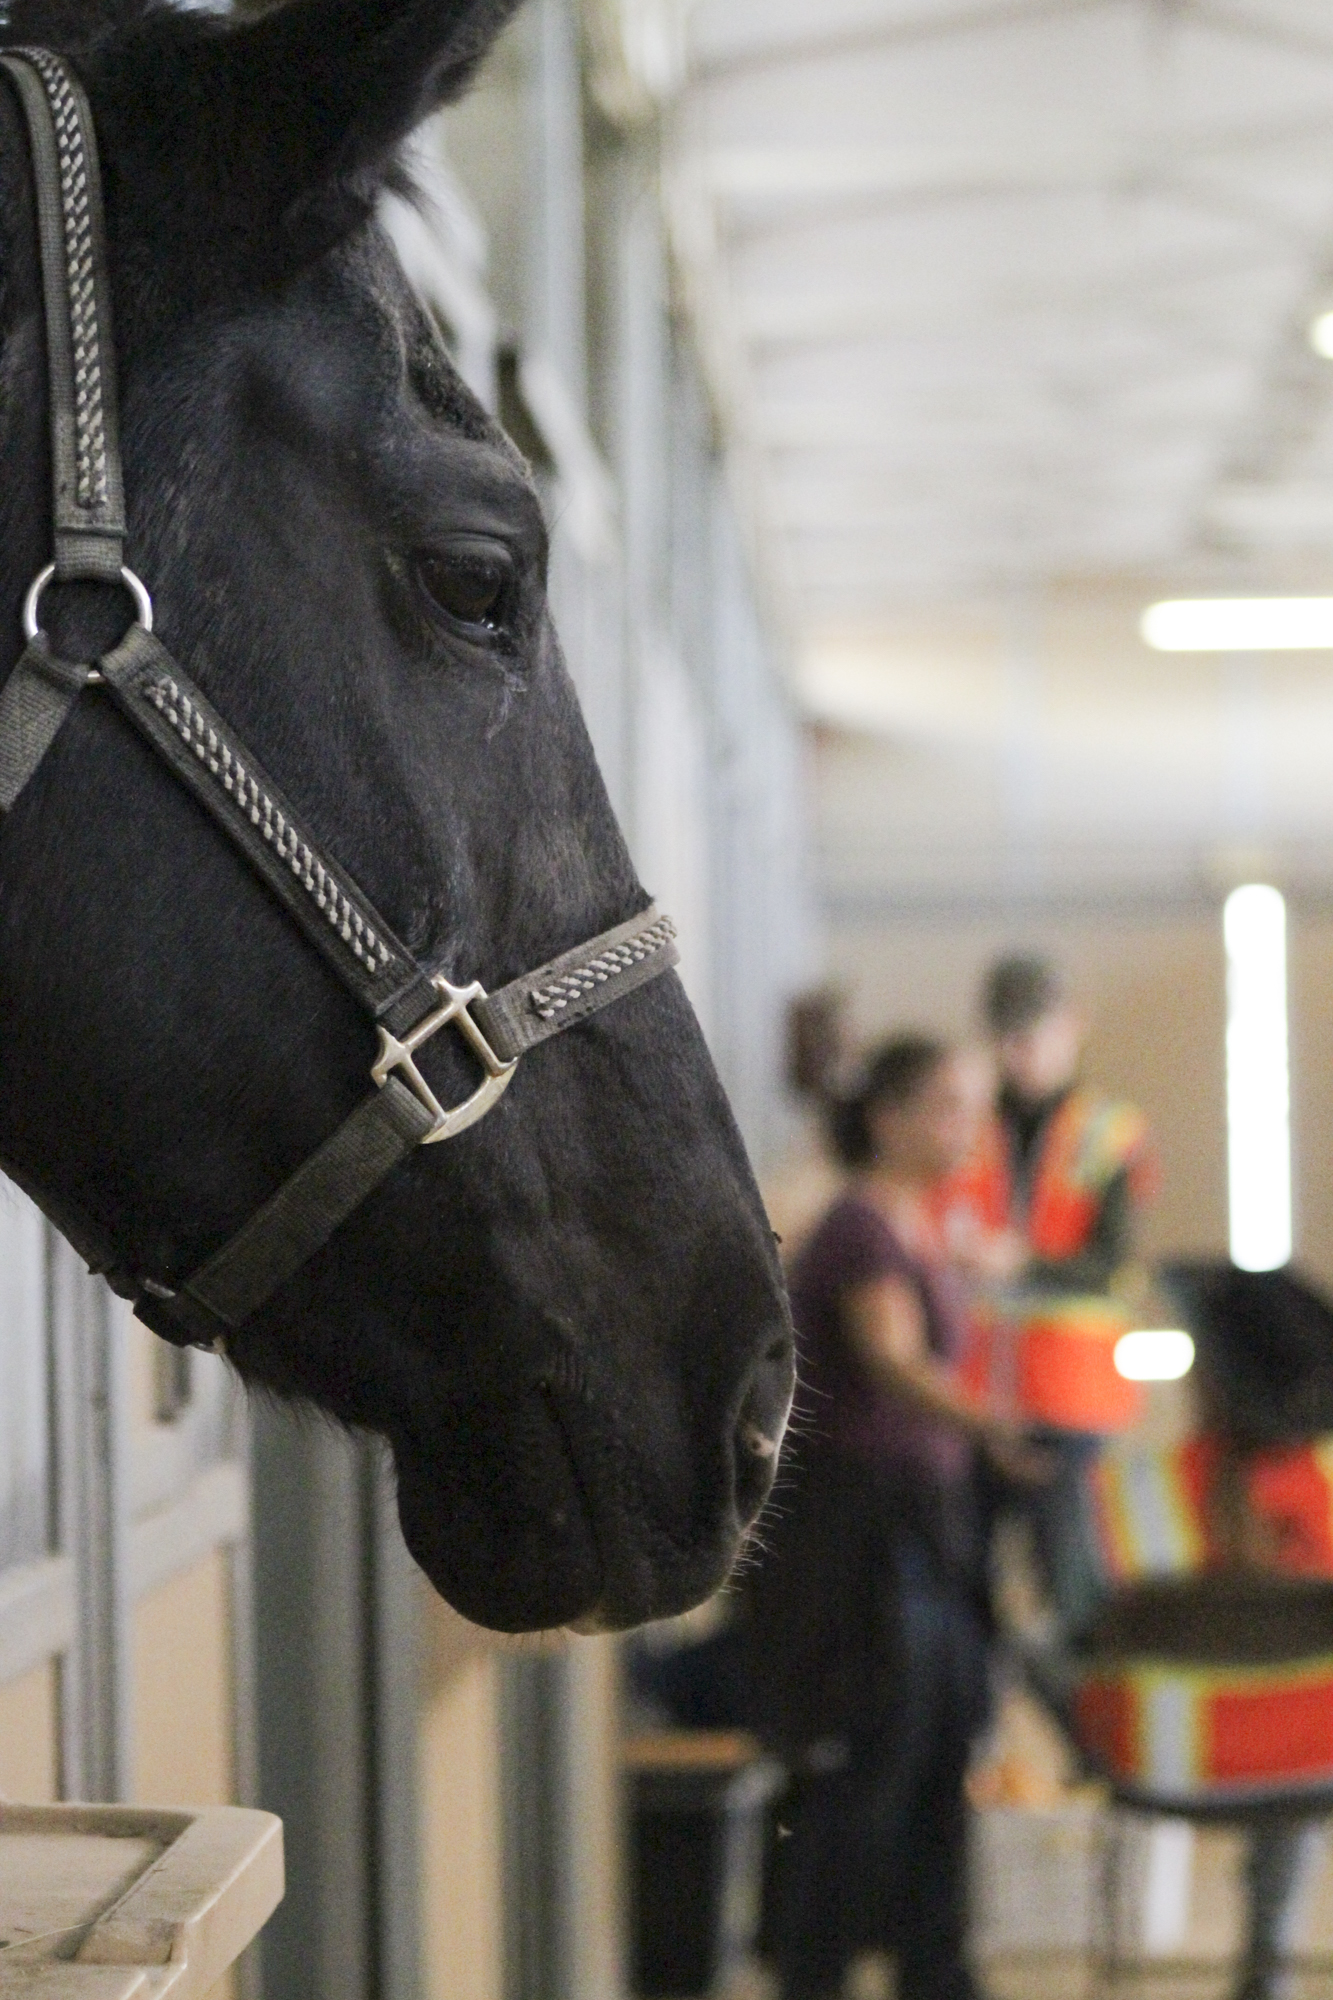 Equestrian Center is over capacity for evacuated animals